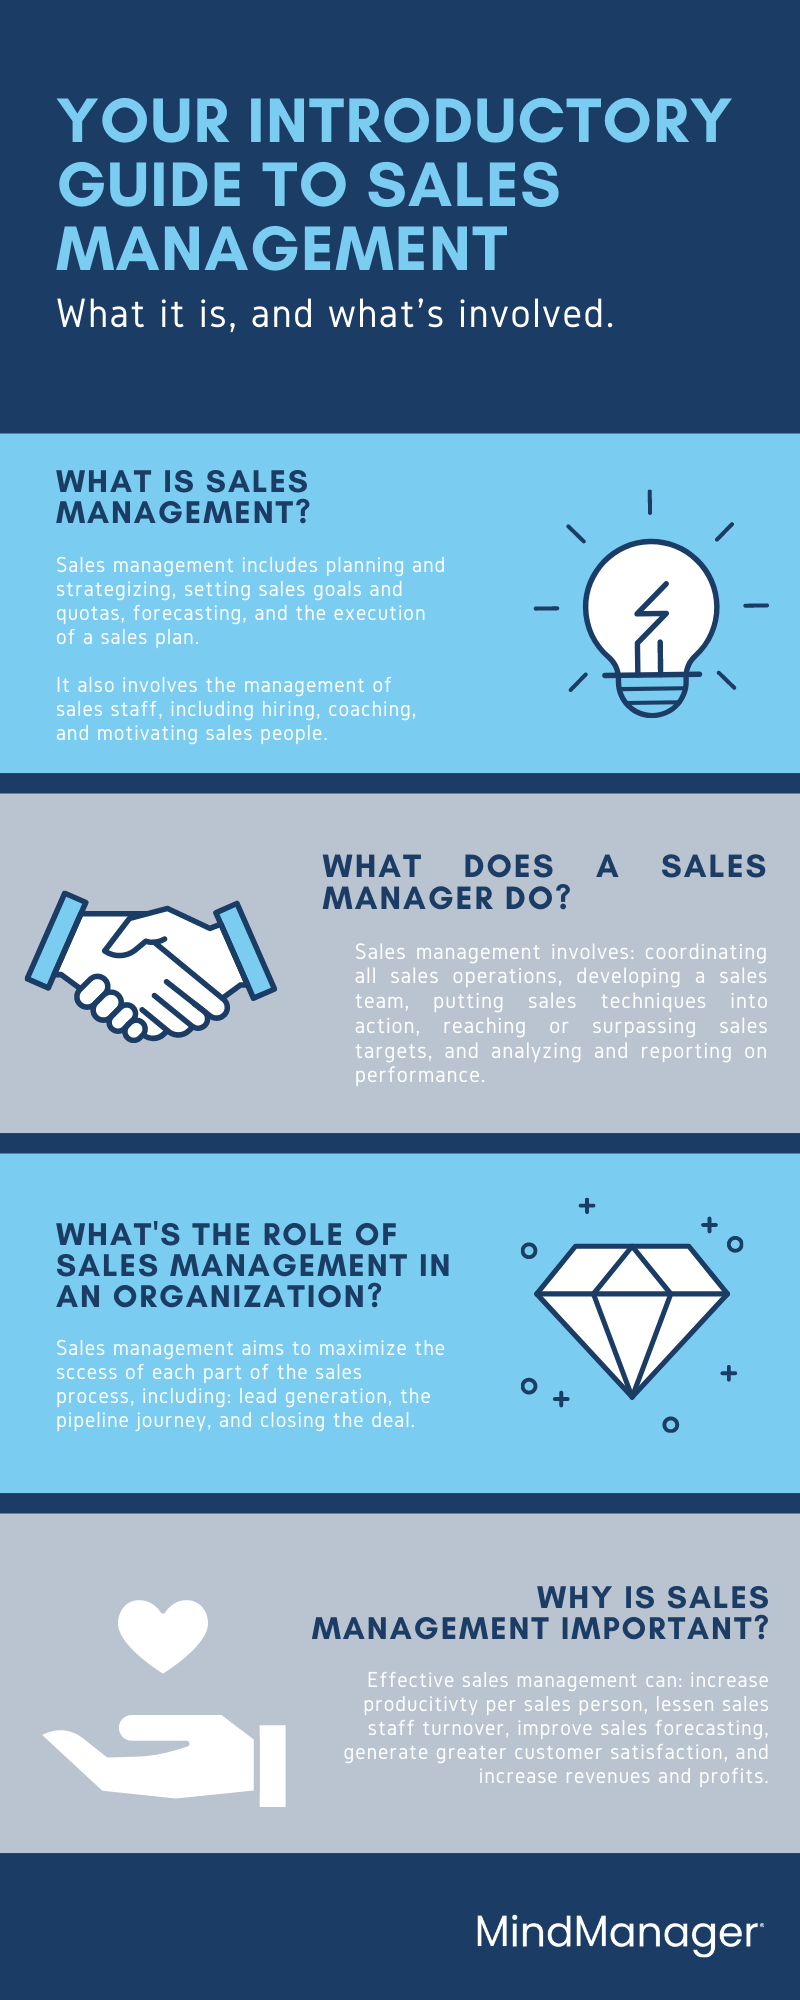 Your introductory guide to sales management | MindManager Blog